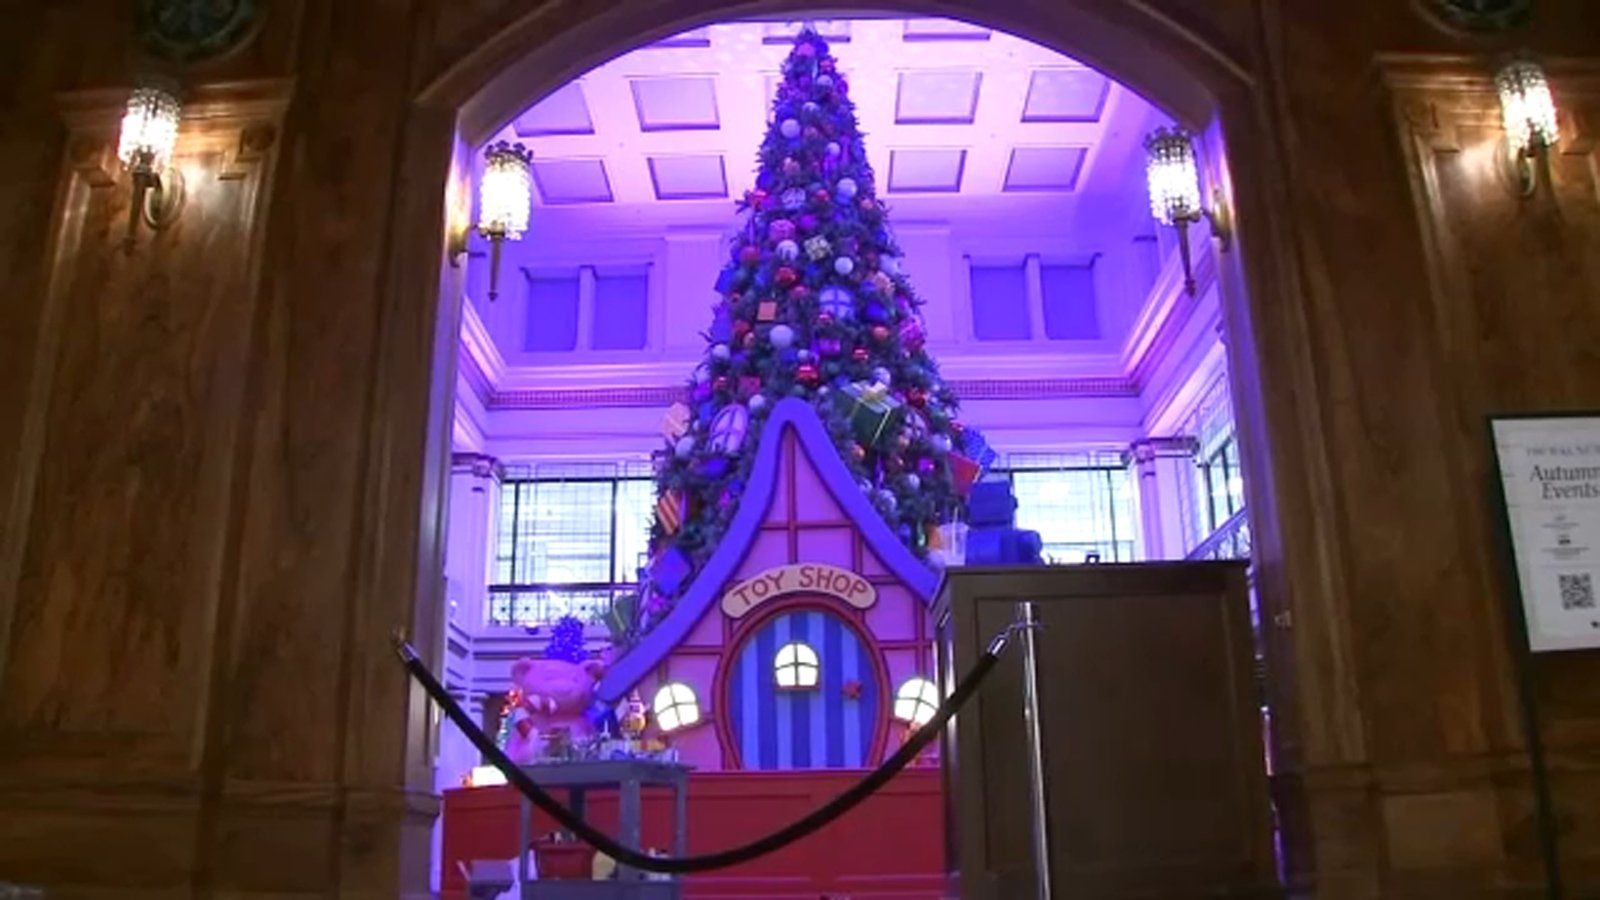 Chicago's Macy's on State Street prepares to unveil holiday window displays, Walnut Room Great Tree